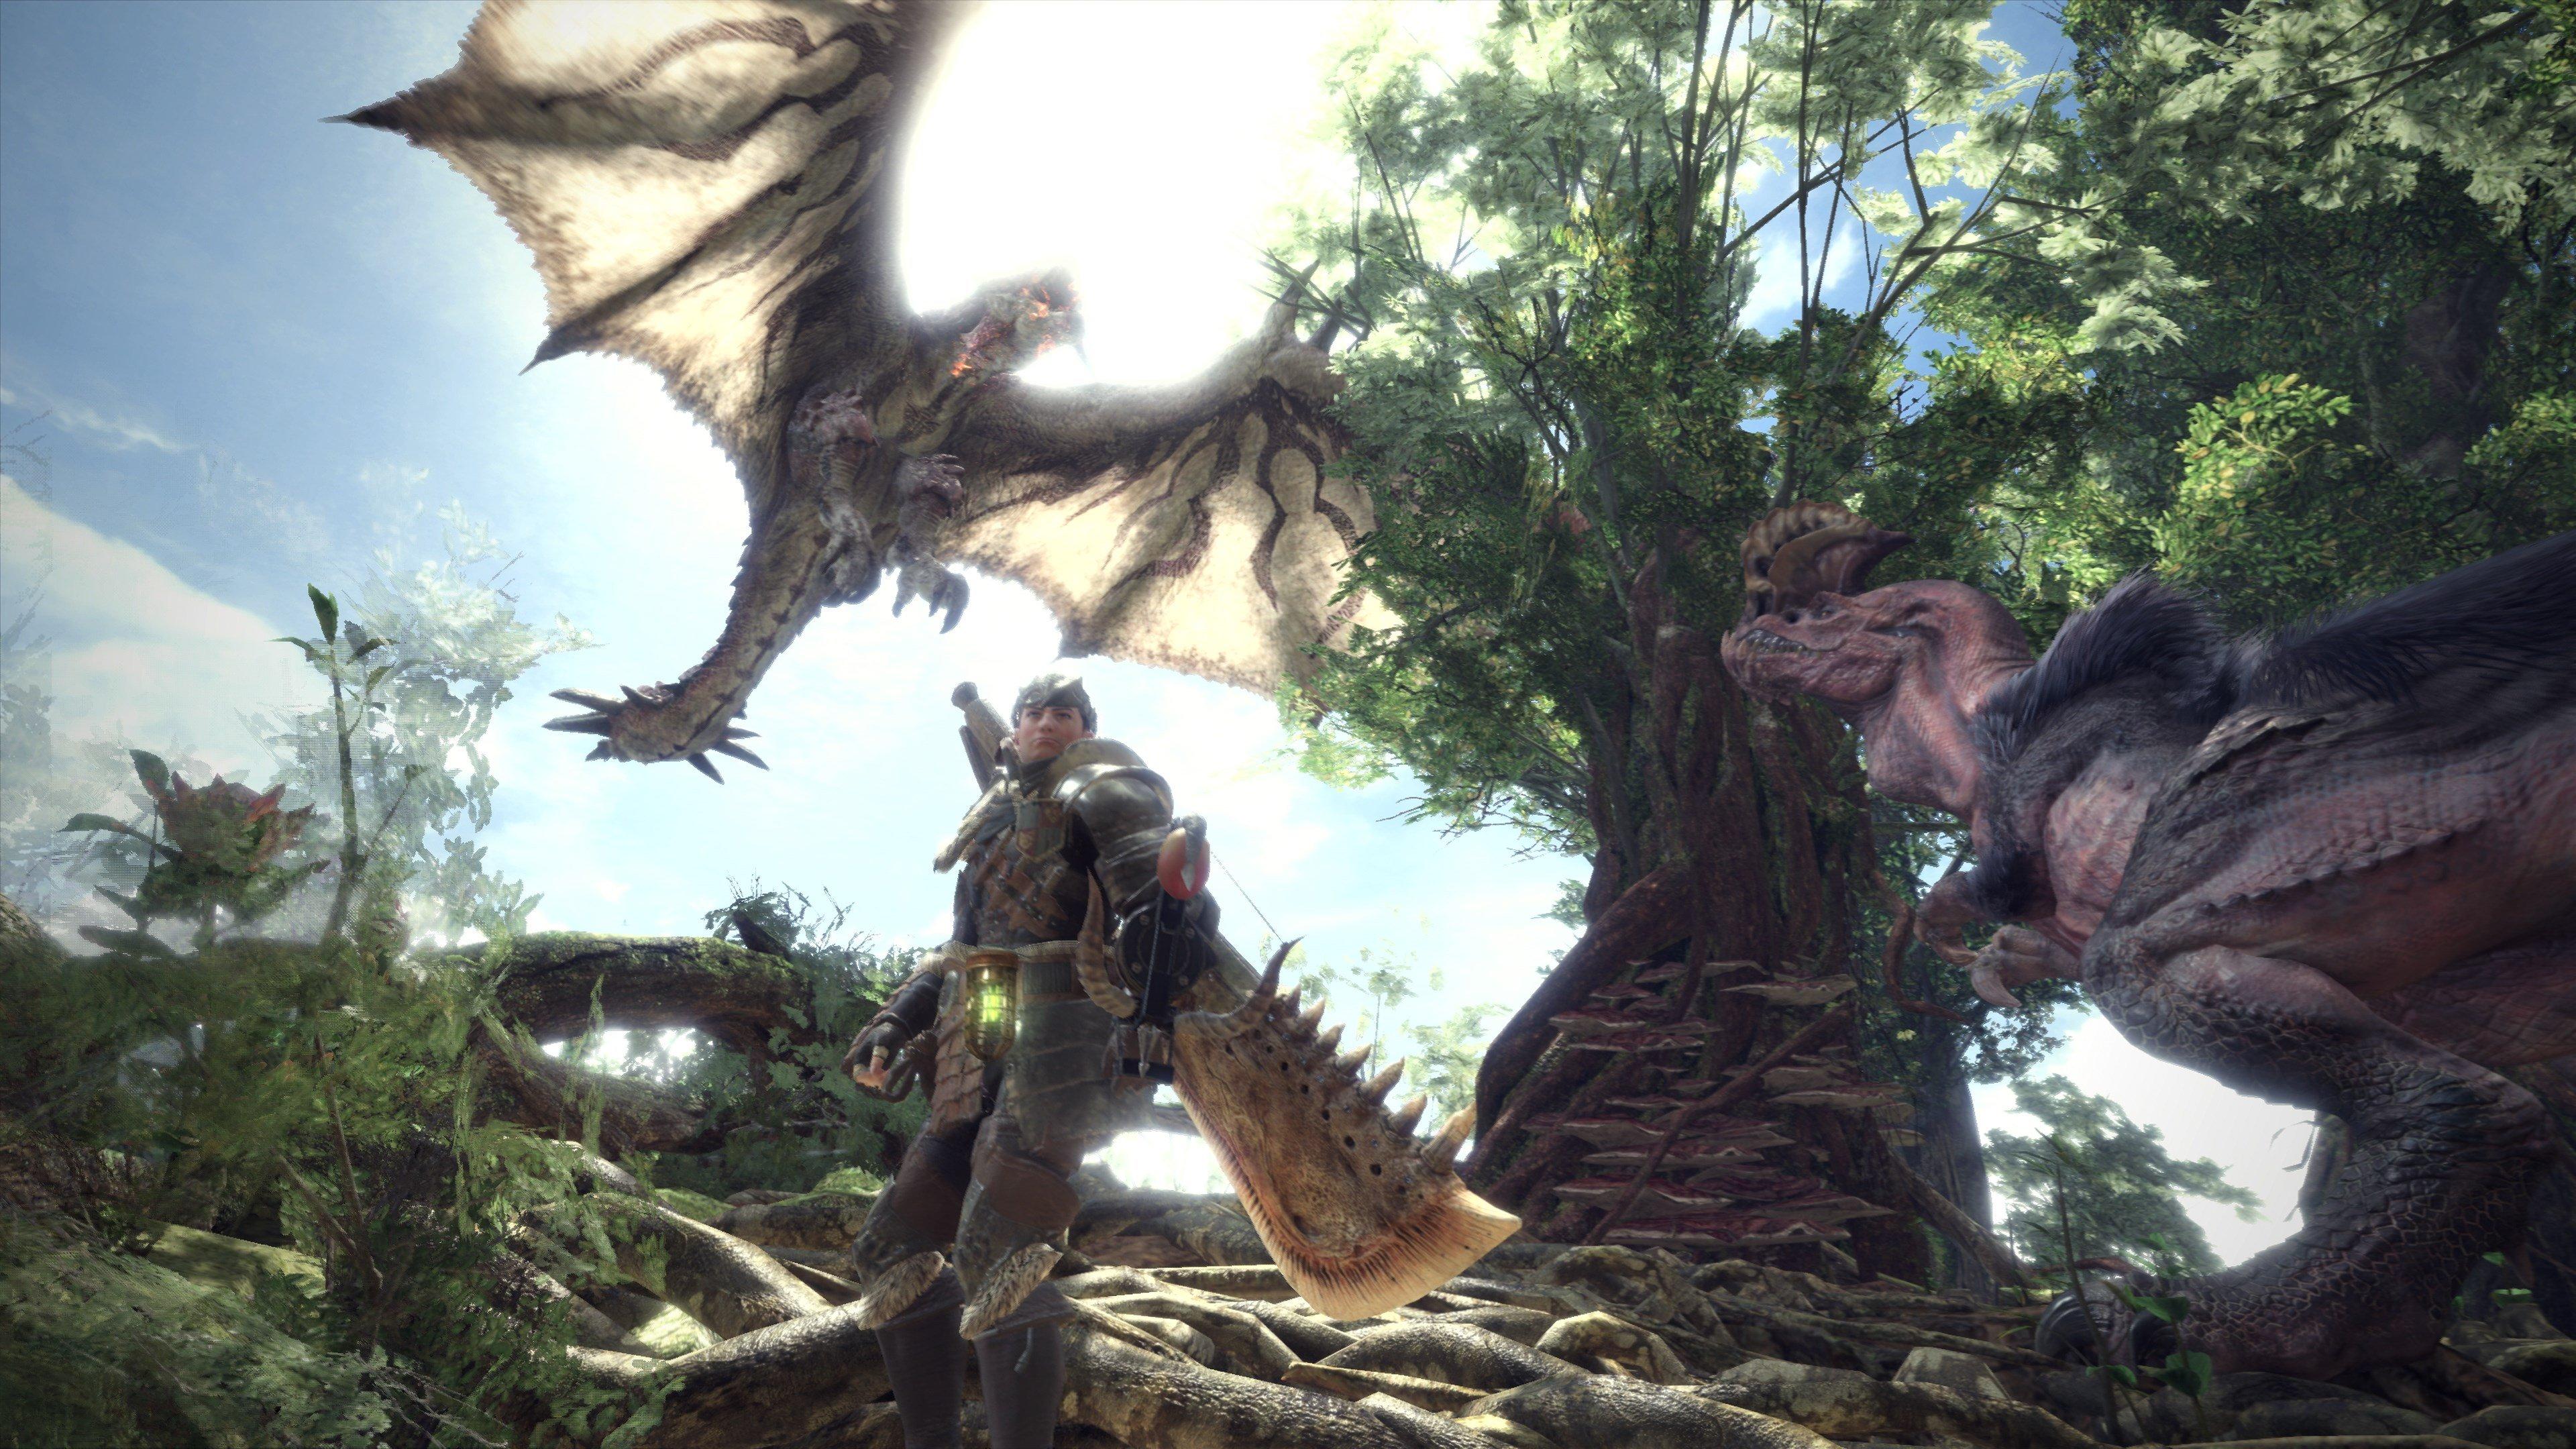 A Monster Hunter: World Beta is Running This Weekend for PS4 - mxdwn Games